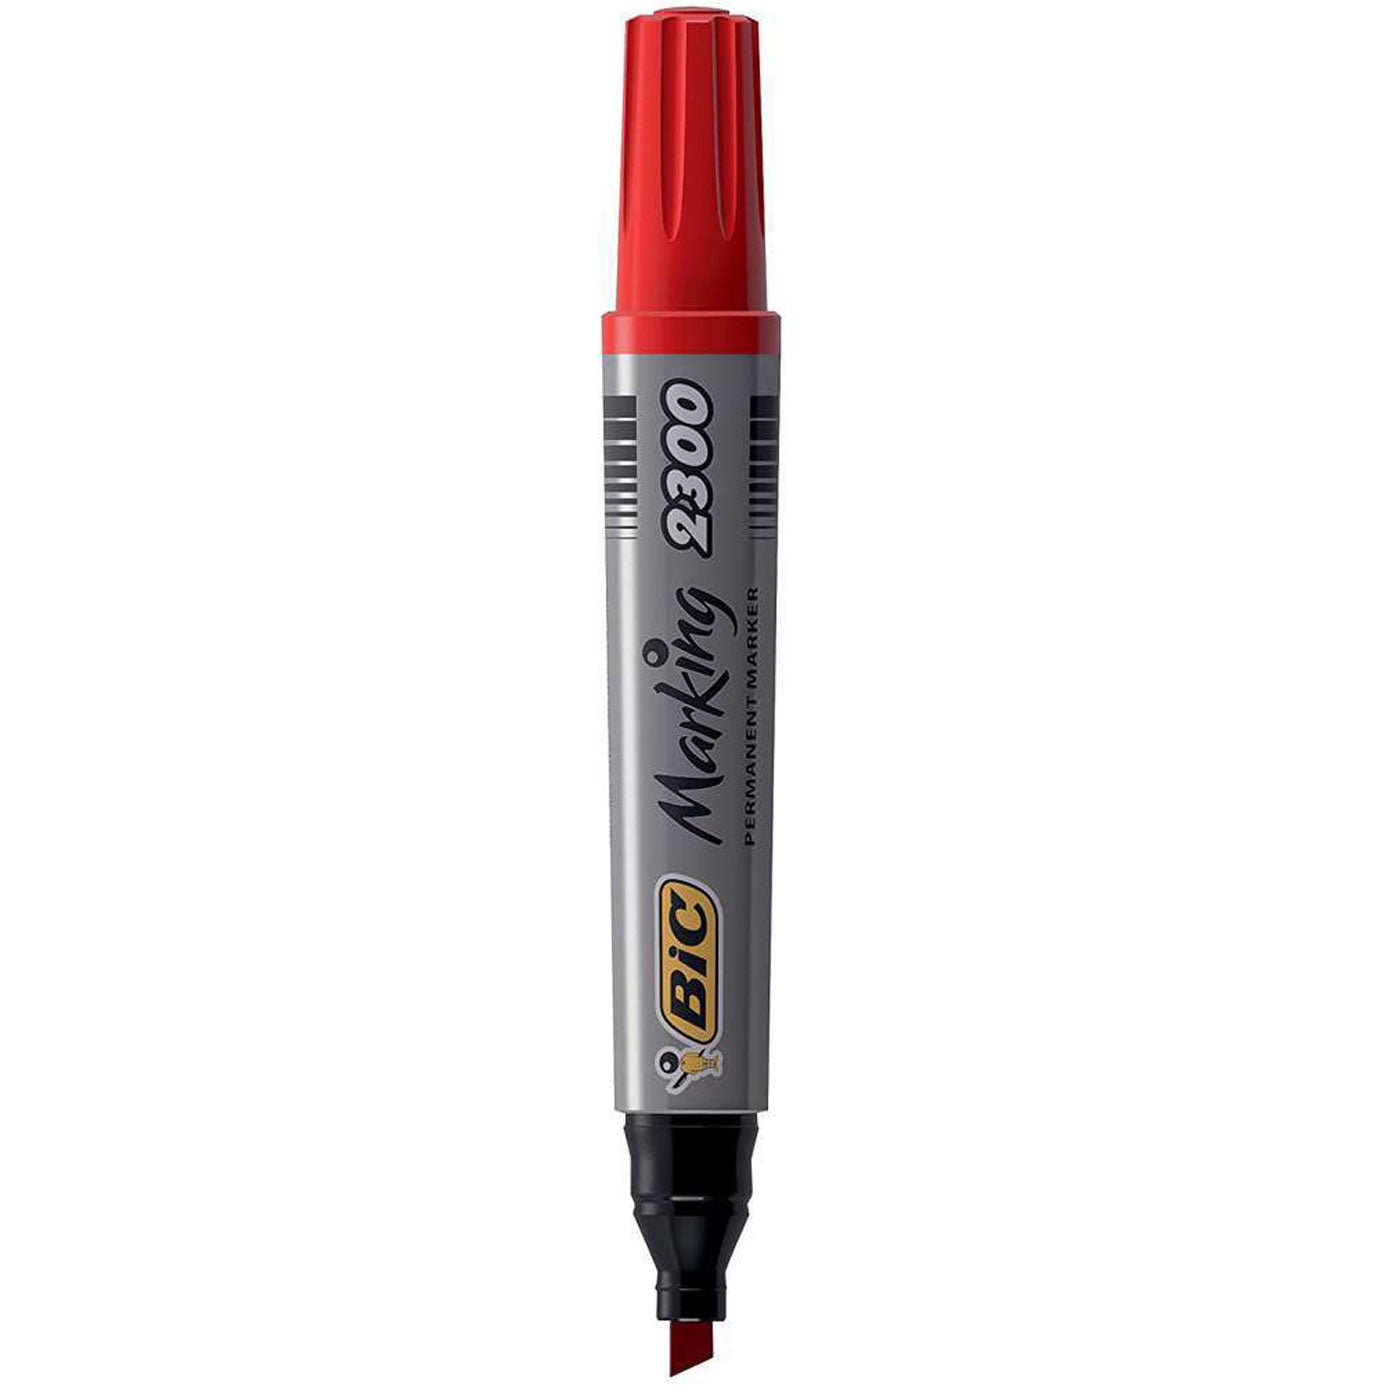 BIC Permanent Marker ECO 2300 Chisel Tip Red